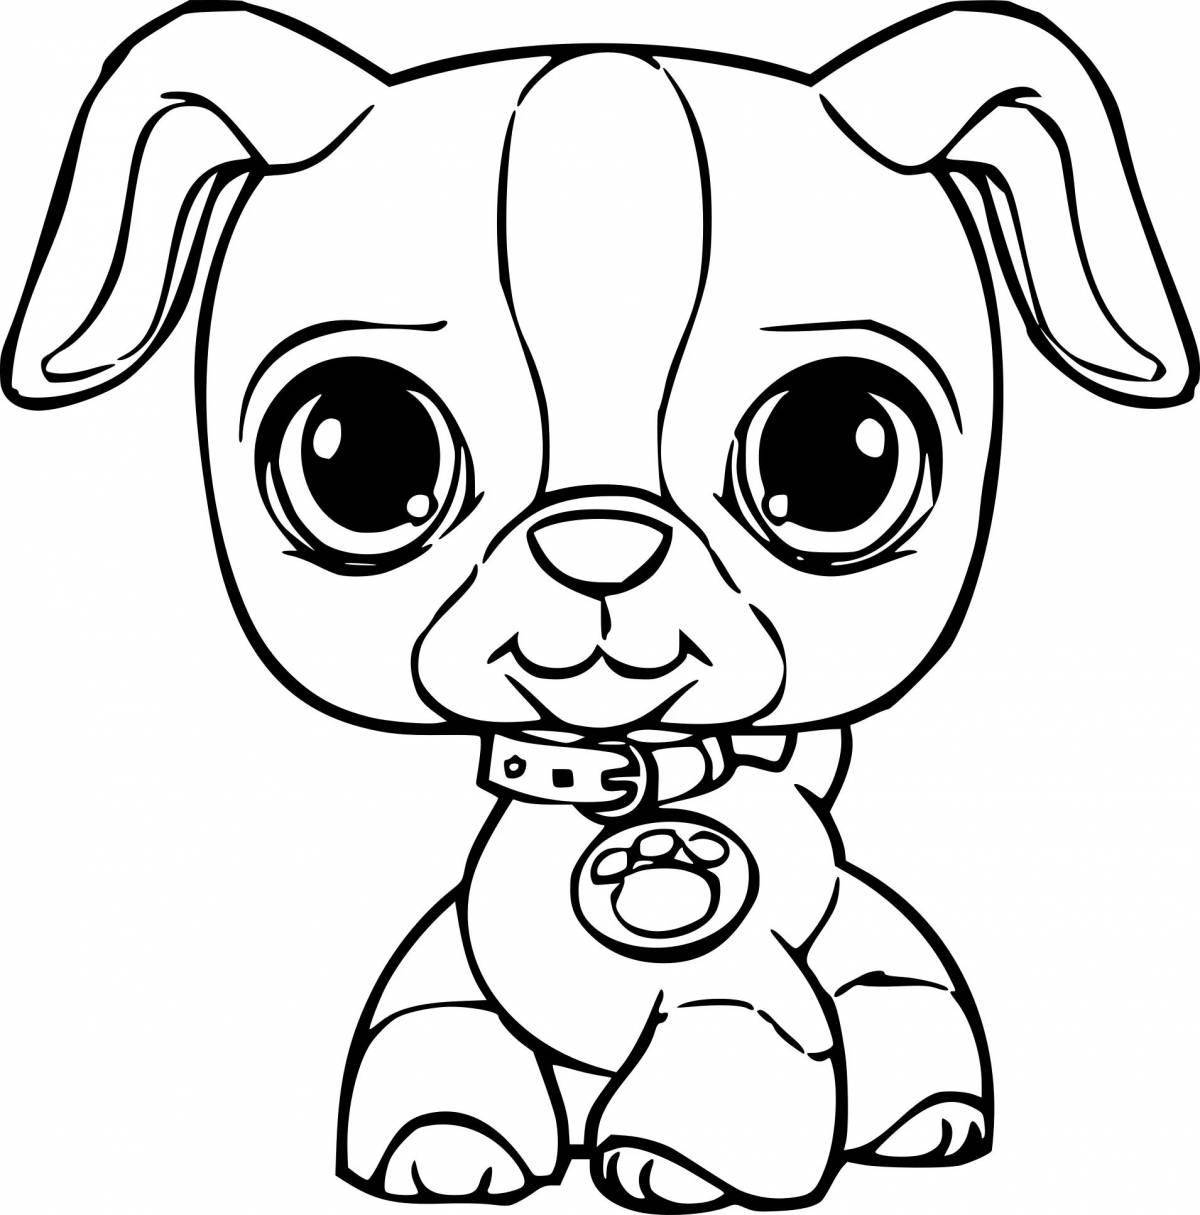 Coloring page cute little puppy